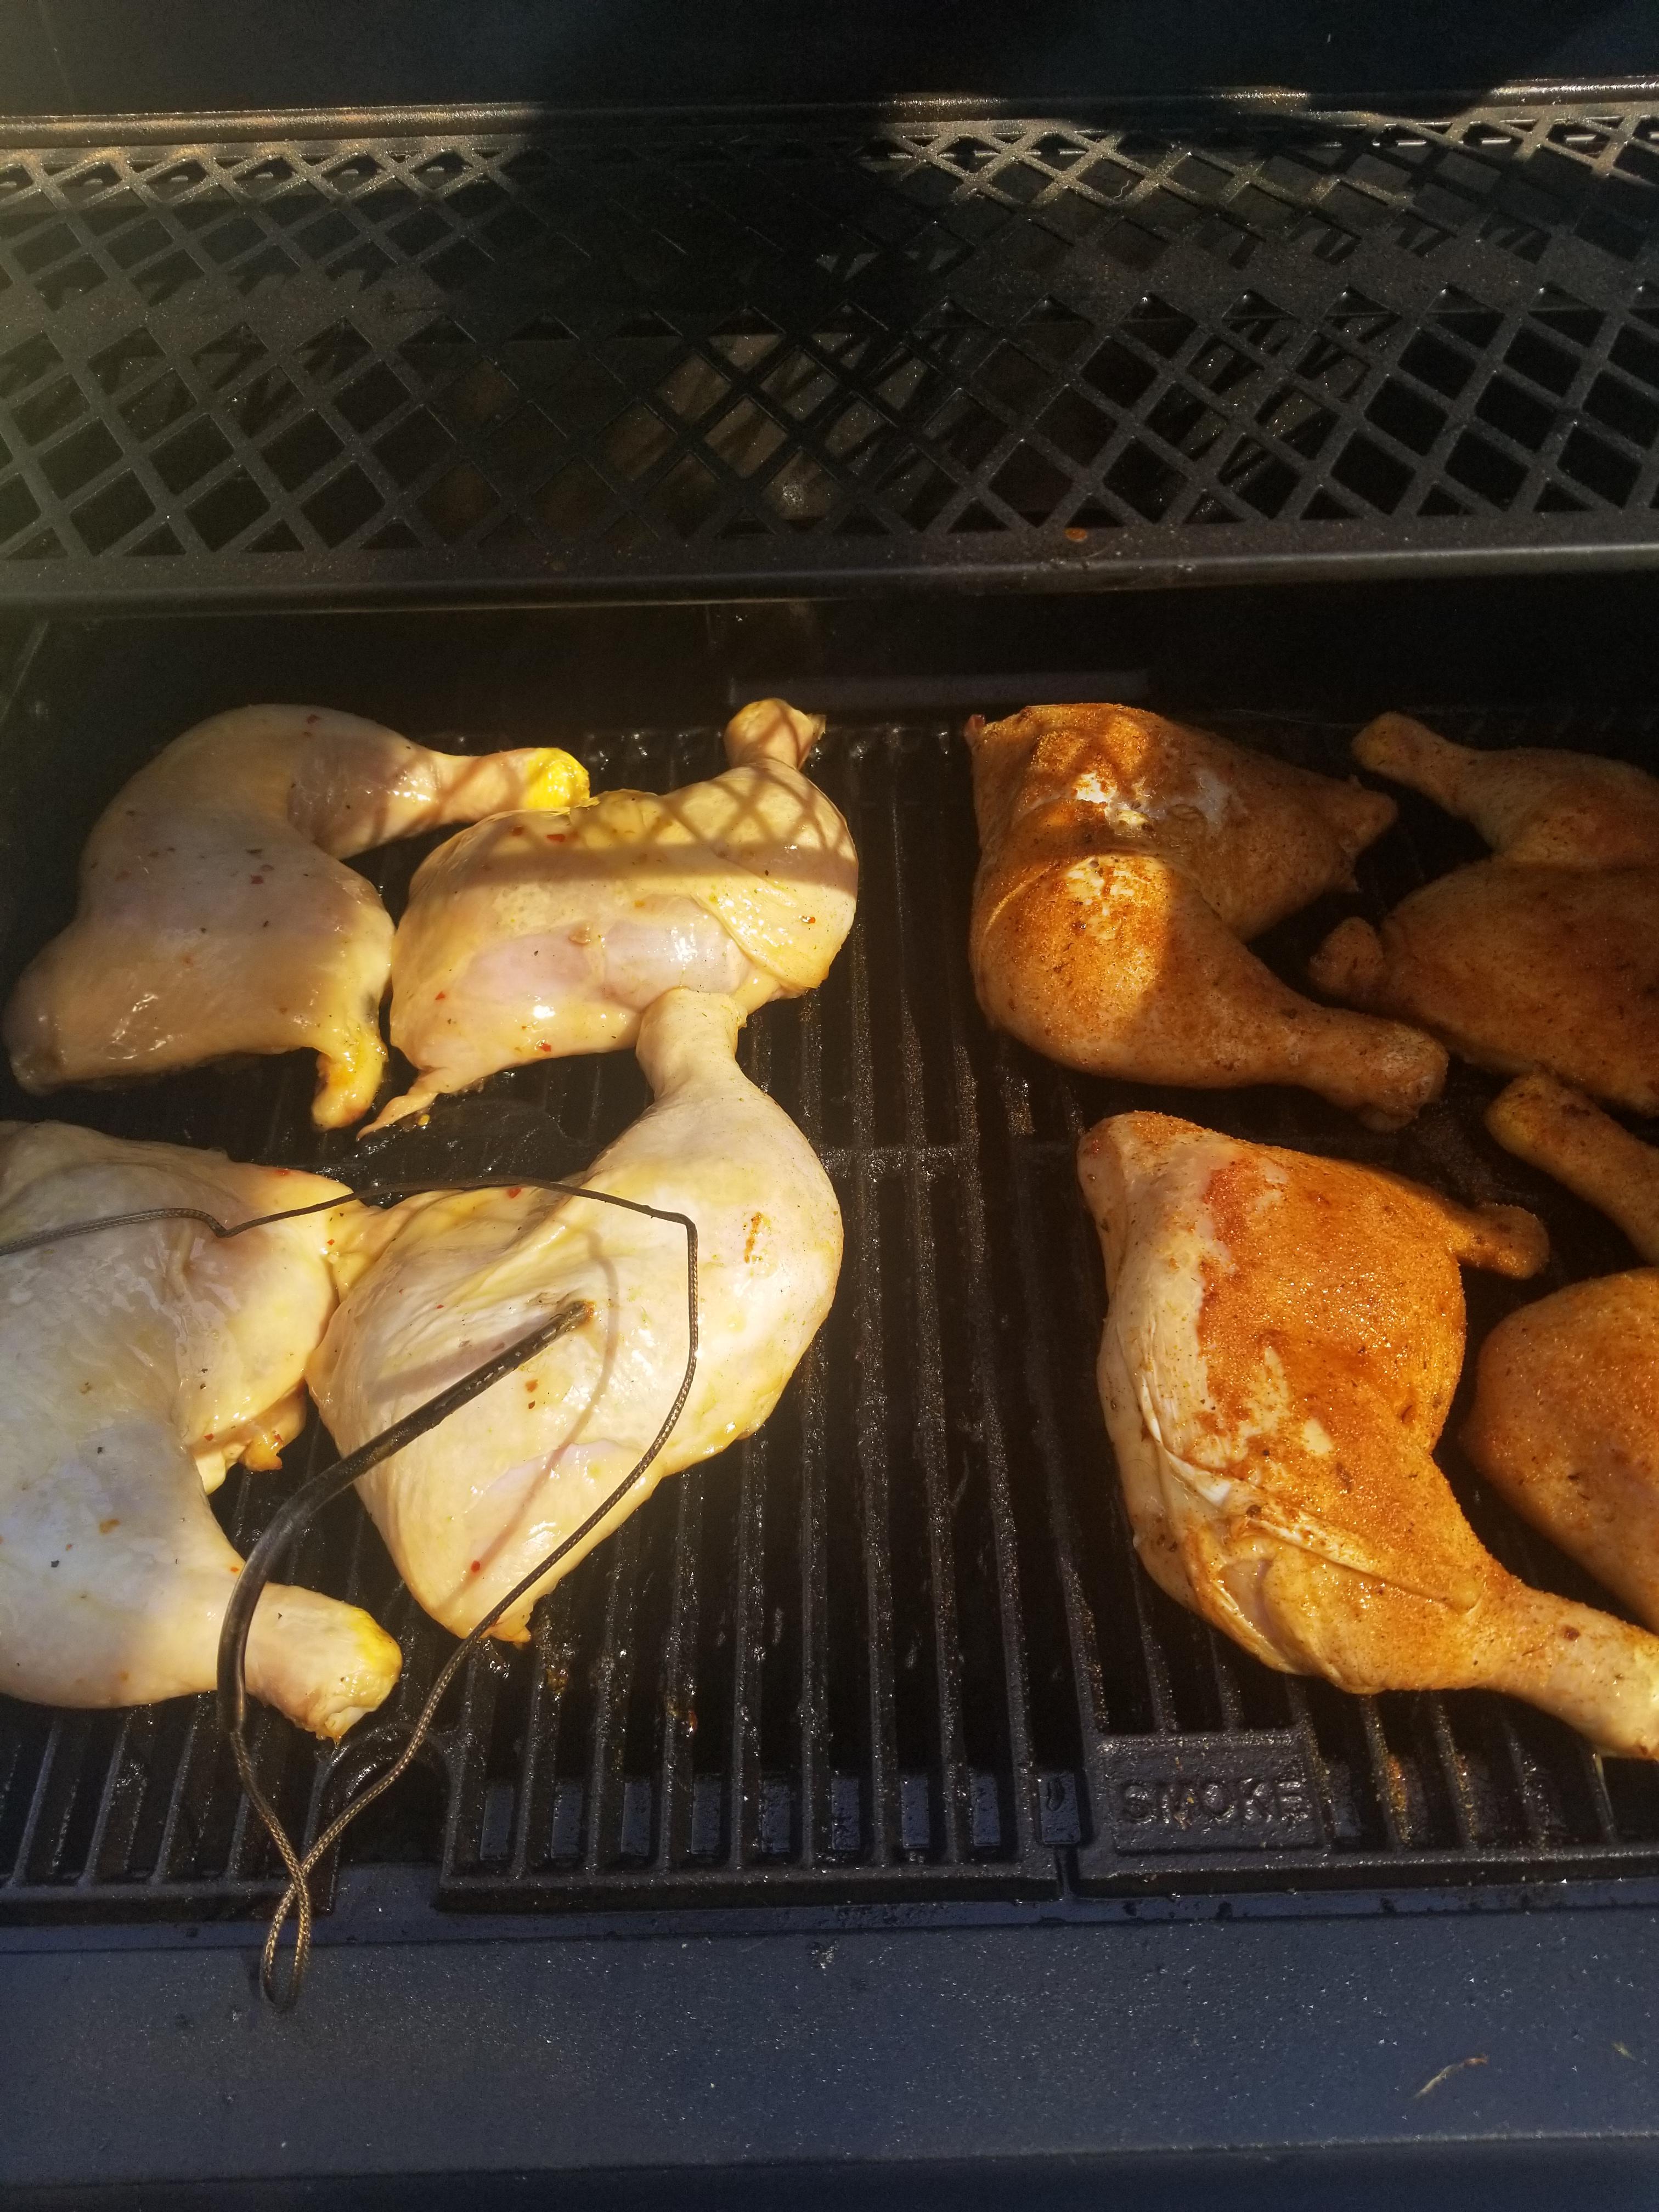 BBQ chicken leg with a meat thermometer showing the internal temperature